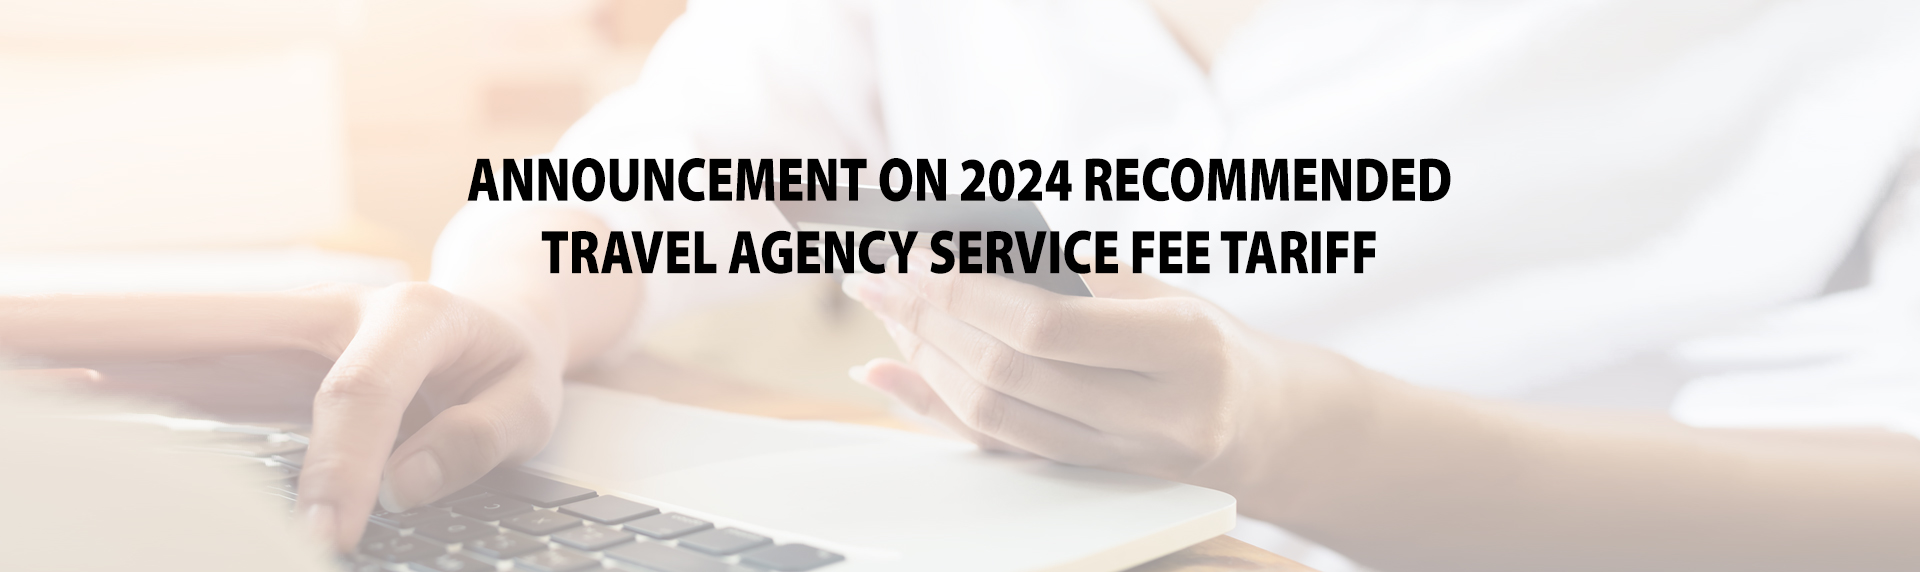 https://www.tursab.org.tr/announcements/announcement-on-year-2024-recommended-travel-agencies-service-fee-tariff